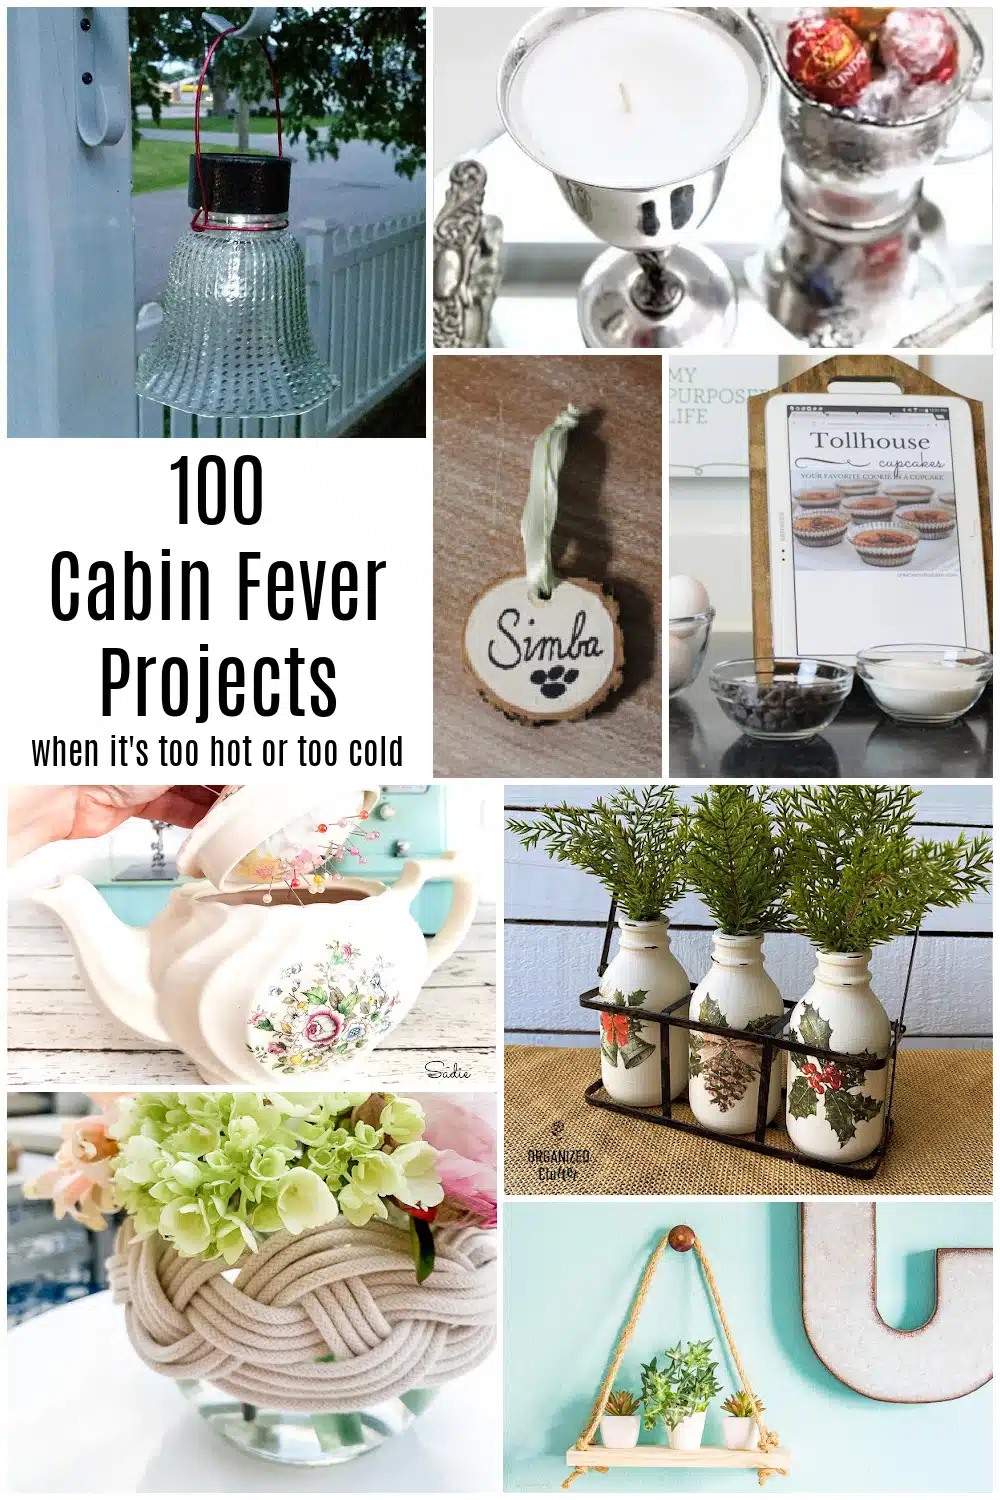 100 Easy Project Ideas for when you're stuck in the house and bored to death. Is it too hot? Too cold? Do you need a creative outlet, but are in a rut? Easy and quick projects to get your mojo back. #MyRepurposedLife #diy #easy #projects #indoors via @repurposedlife